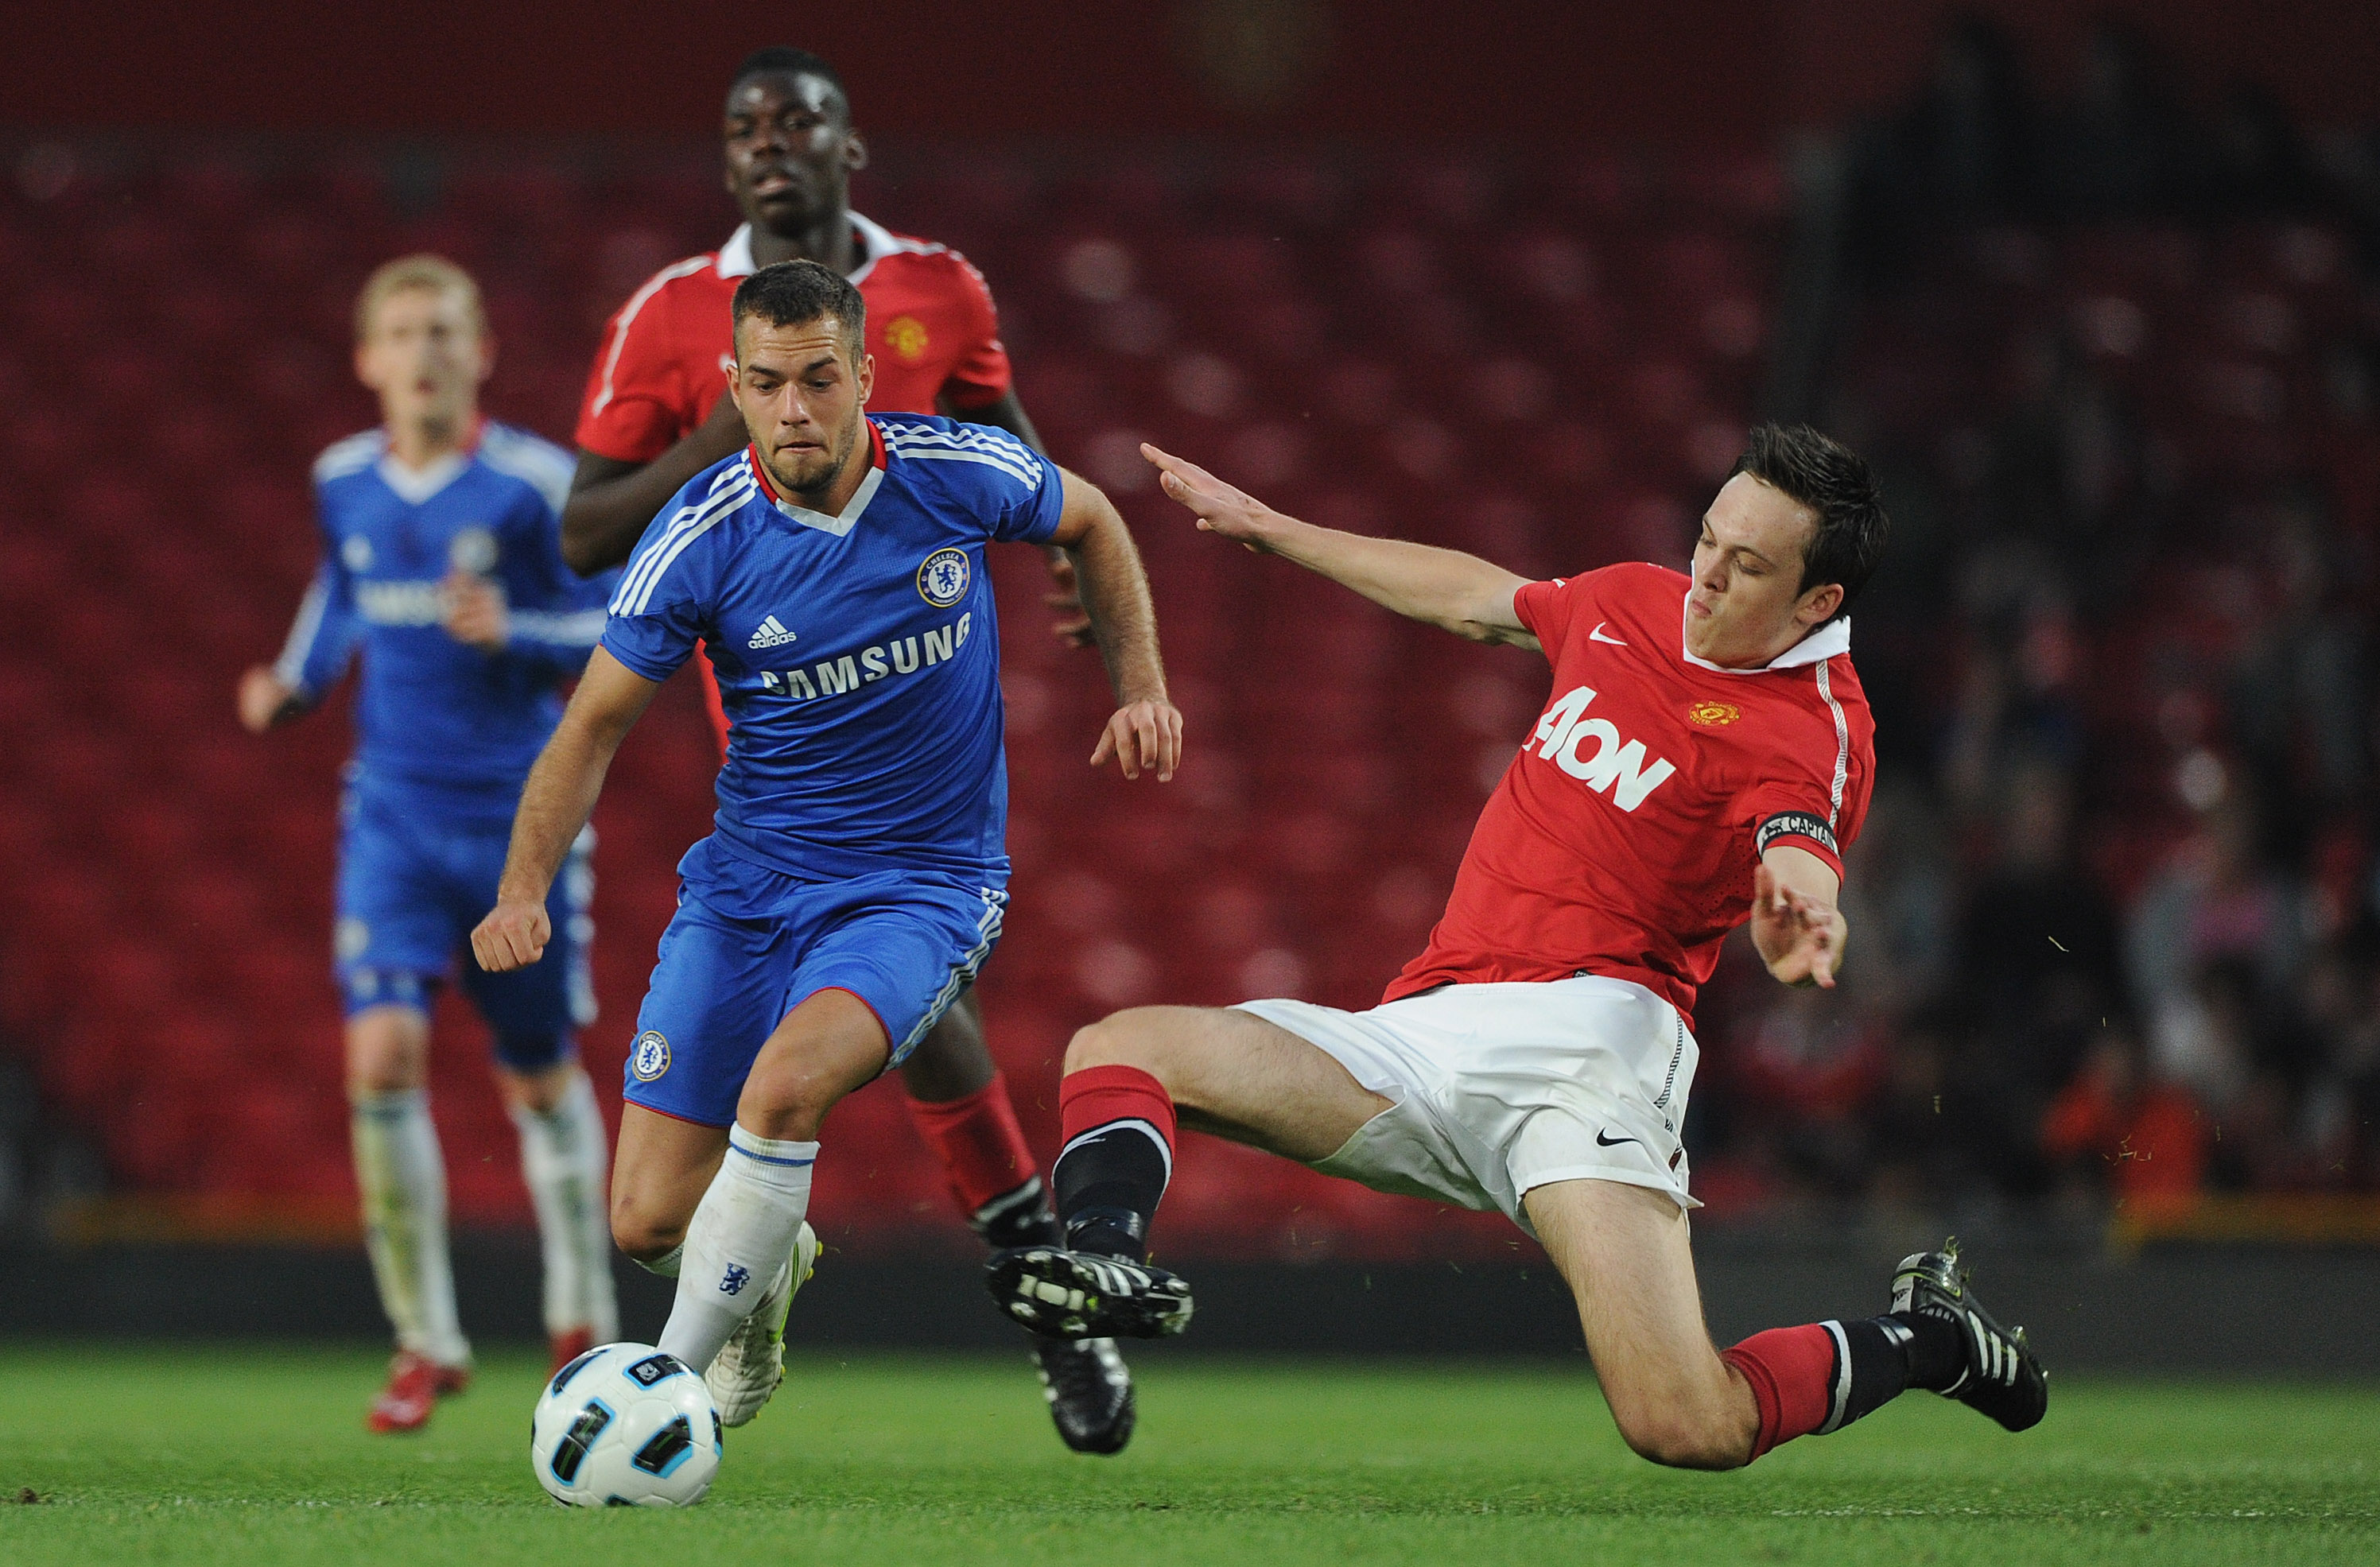 MANCHESTER, ENGLAND - APRIL 20: Milan Lalkovic of Chelsea is tackled by Tom Thorpe of Manchester United during the FA Youth Cup Semi Final 2nd Leg between Manchester United and Chelsea at Old Trafford on April 20, 2011 in Manchester, England.  (Photo by Michael Regan/Getty Images)